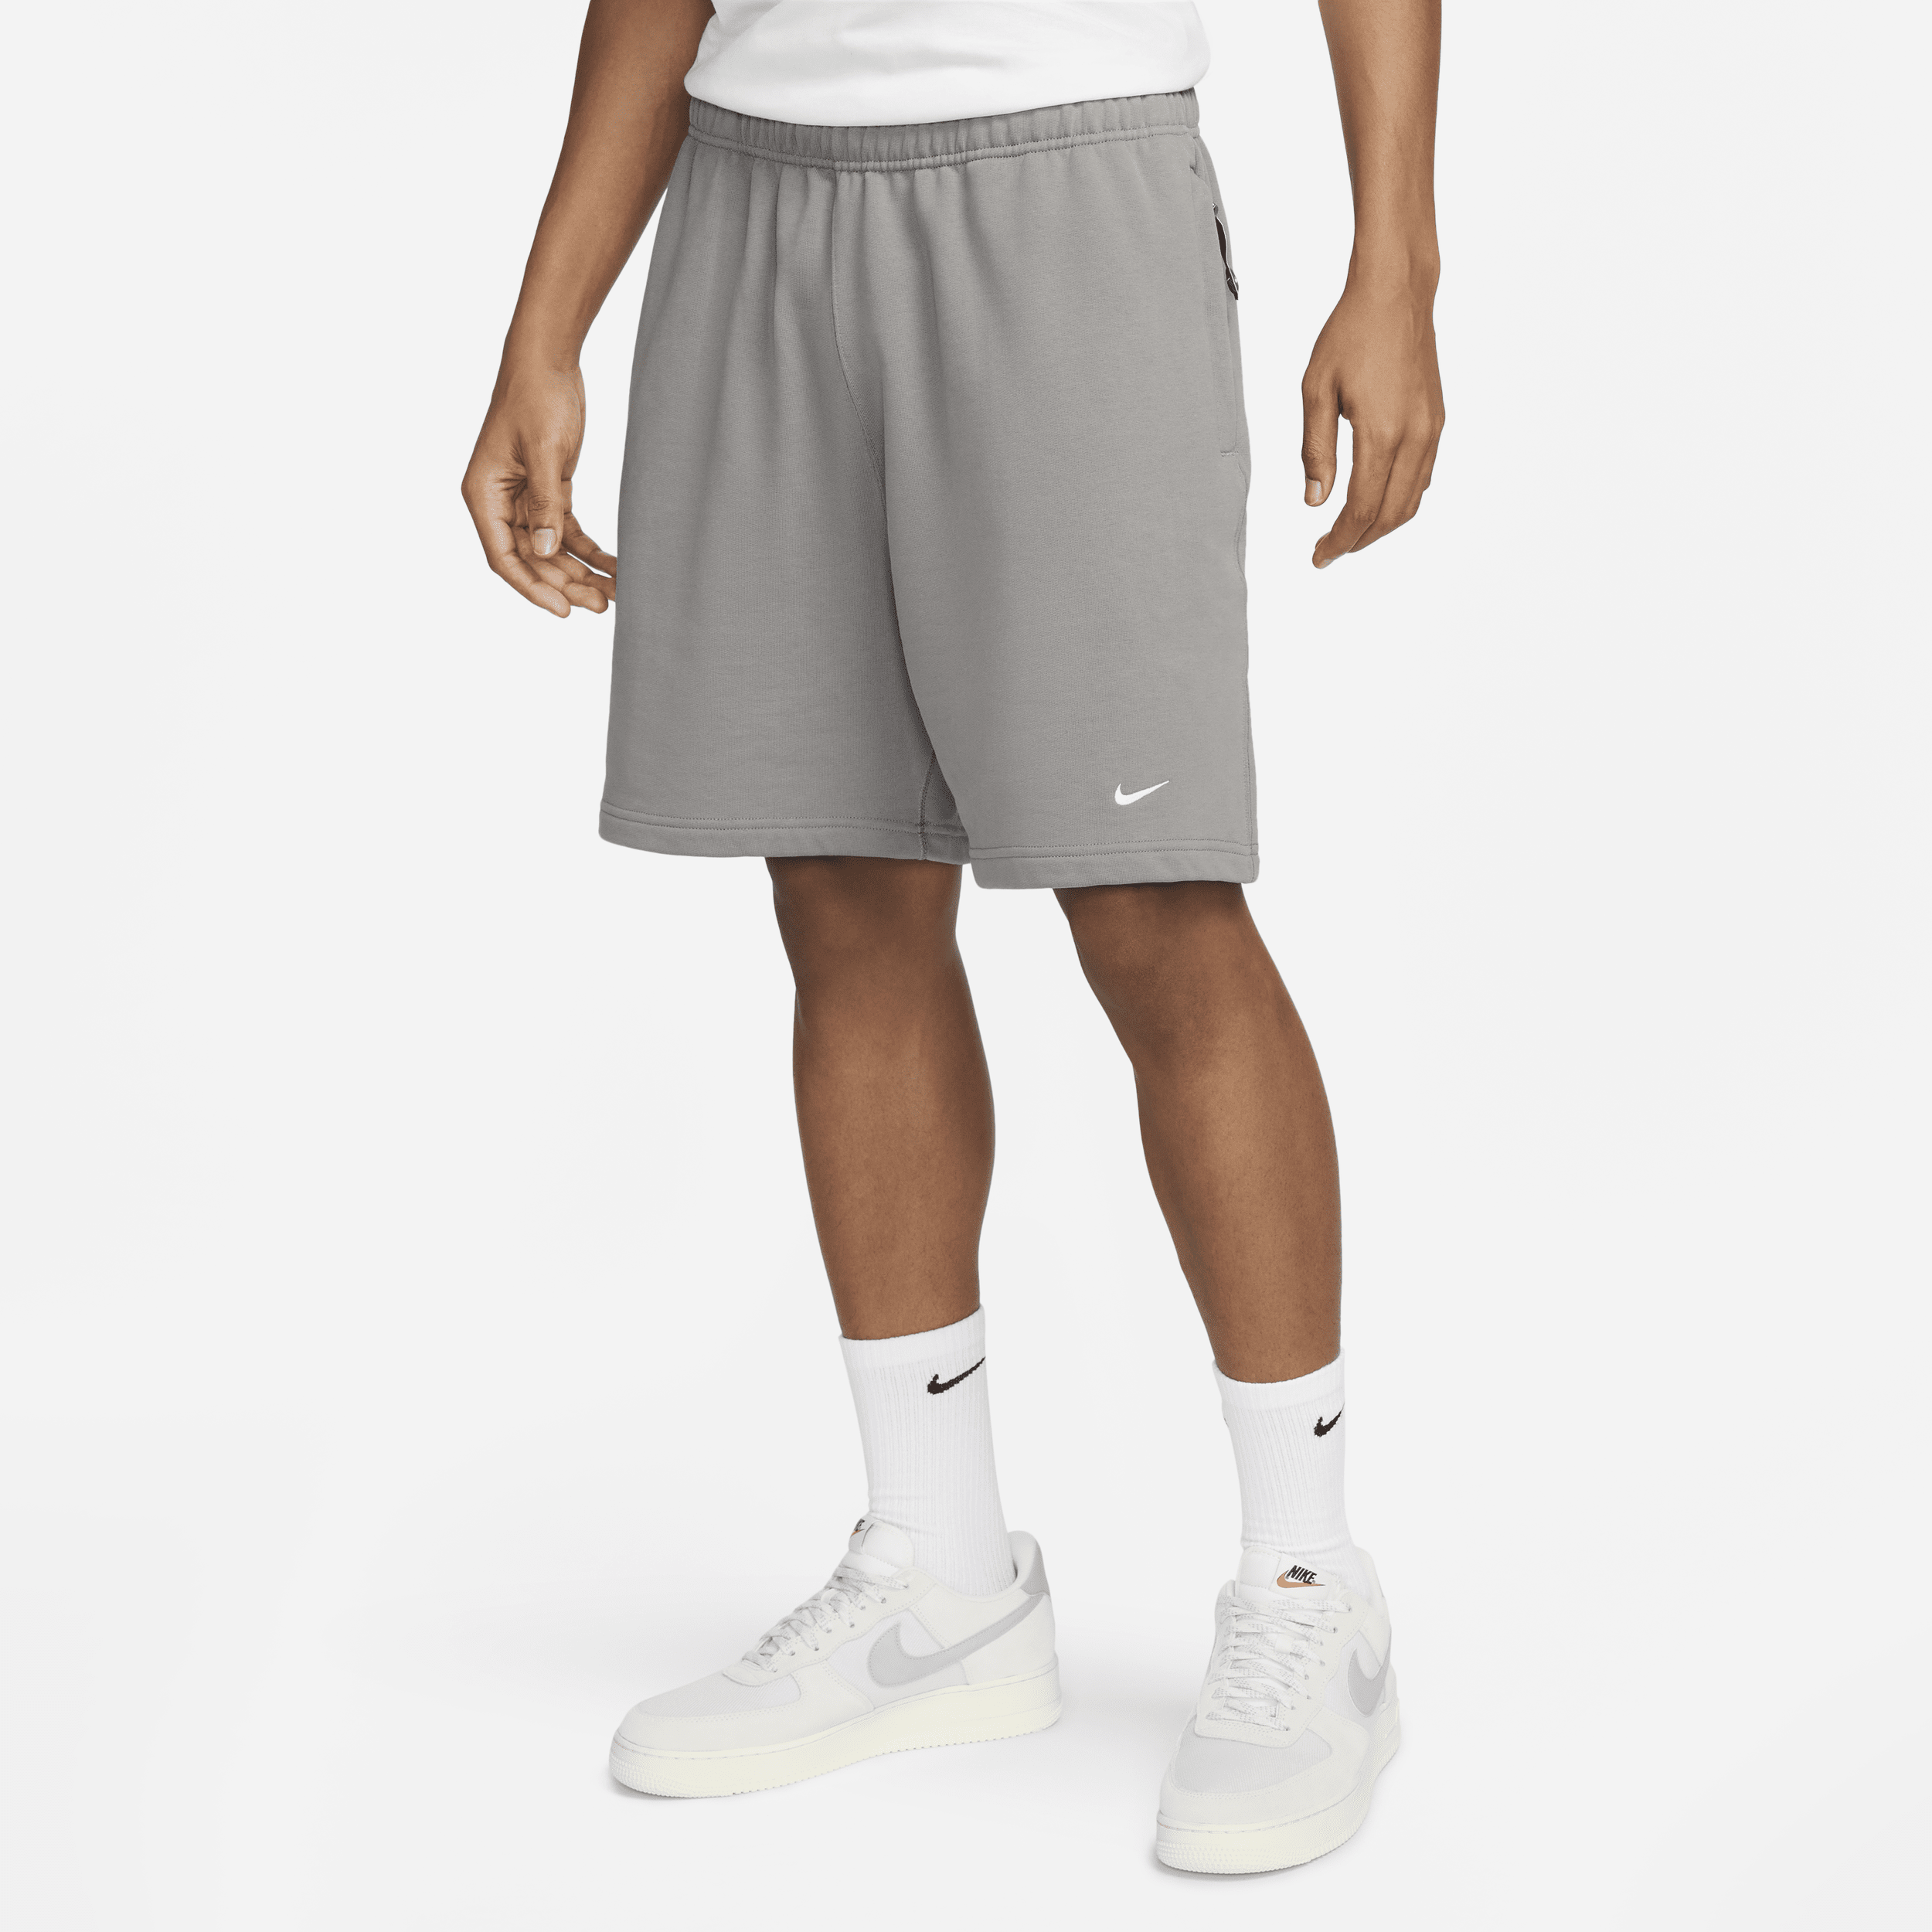 NIKE MEN'S SOLO SWOOSH FRENCH TERRY SHORTS,1009780512